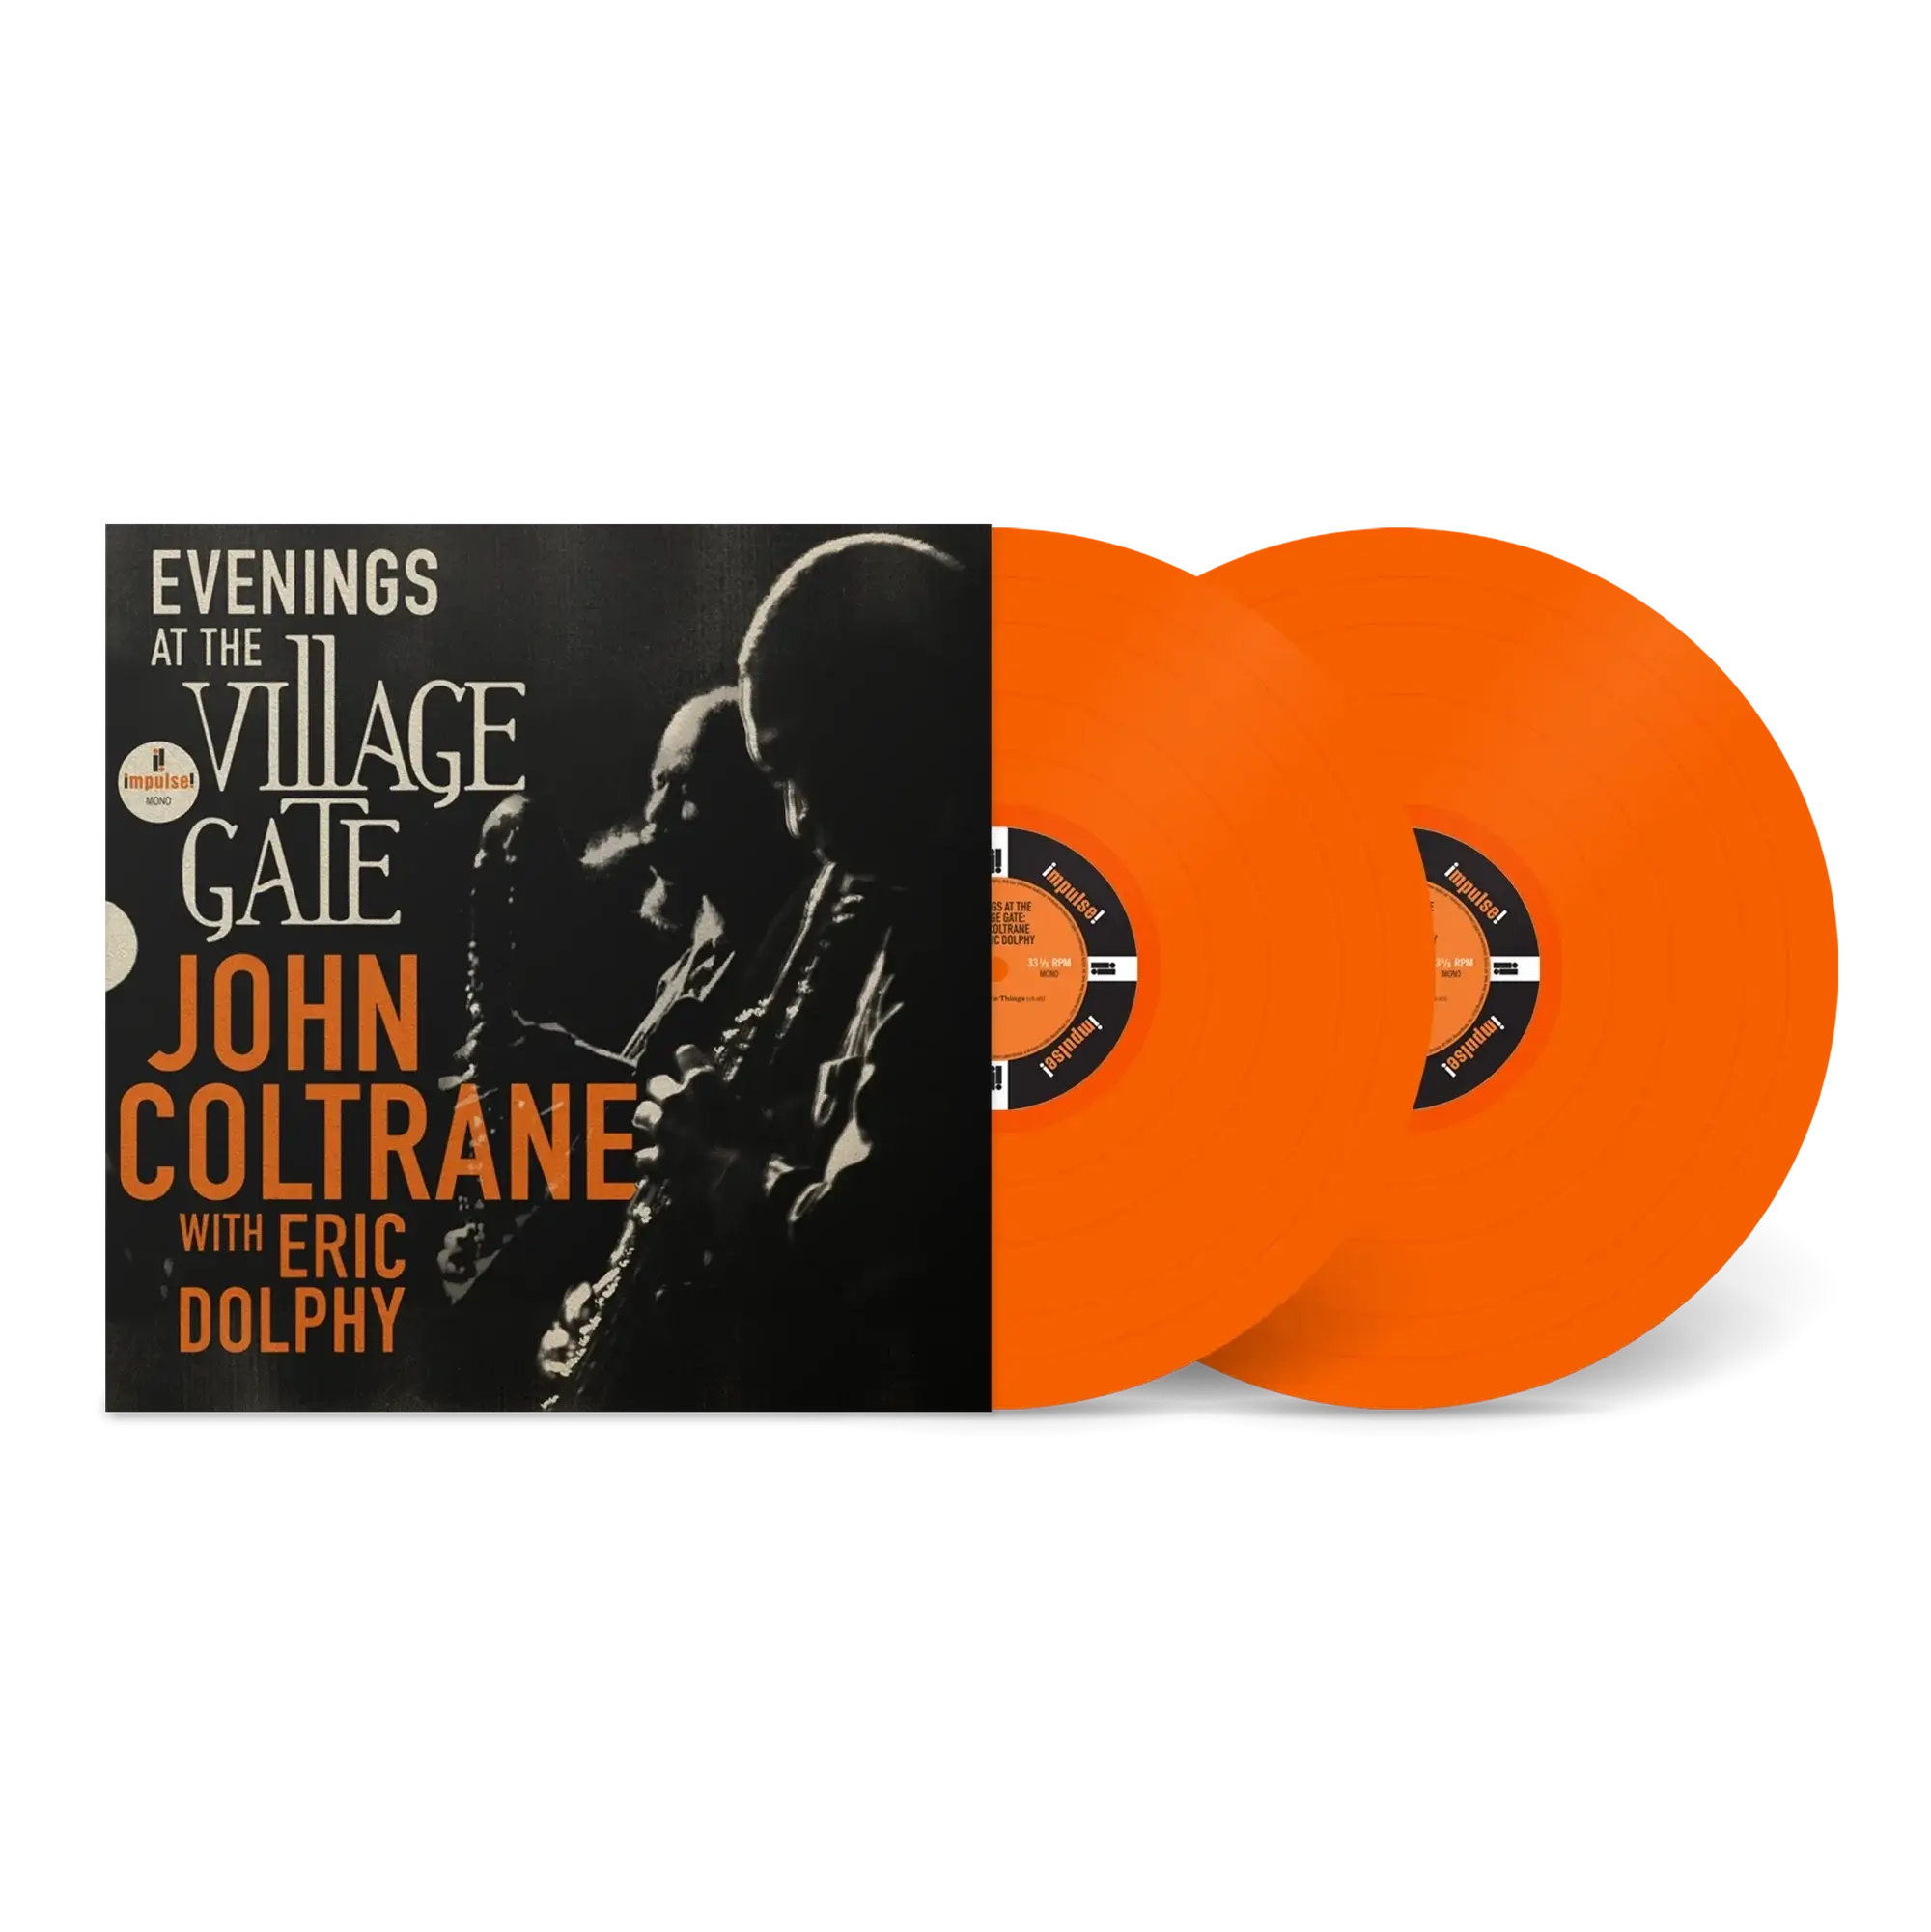 Album artwork for Evenings At The Village Gate: John Coltrane with Eric Dolphy   by John Coltrane